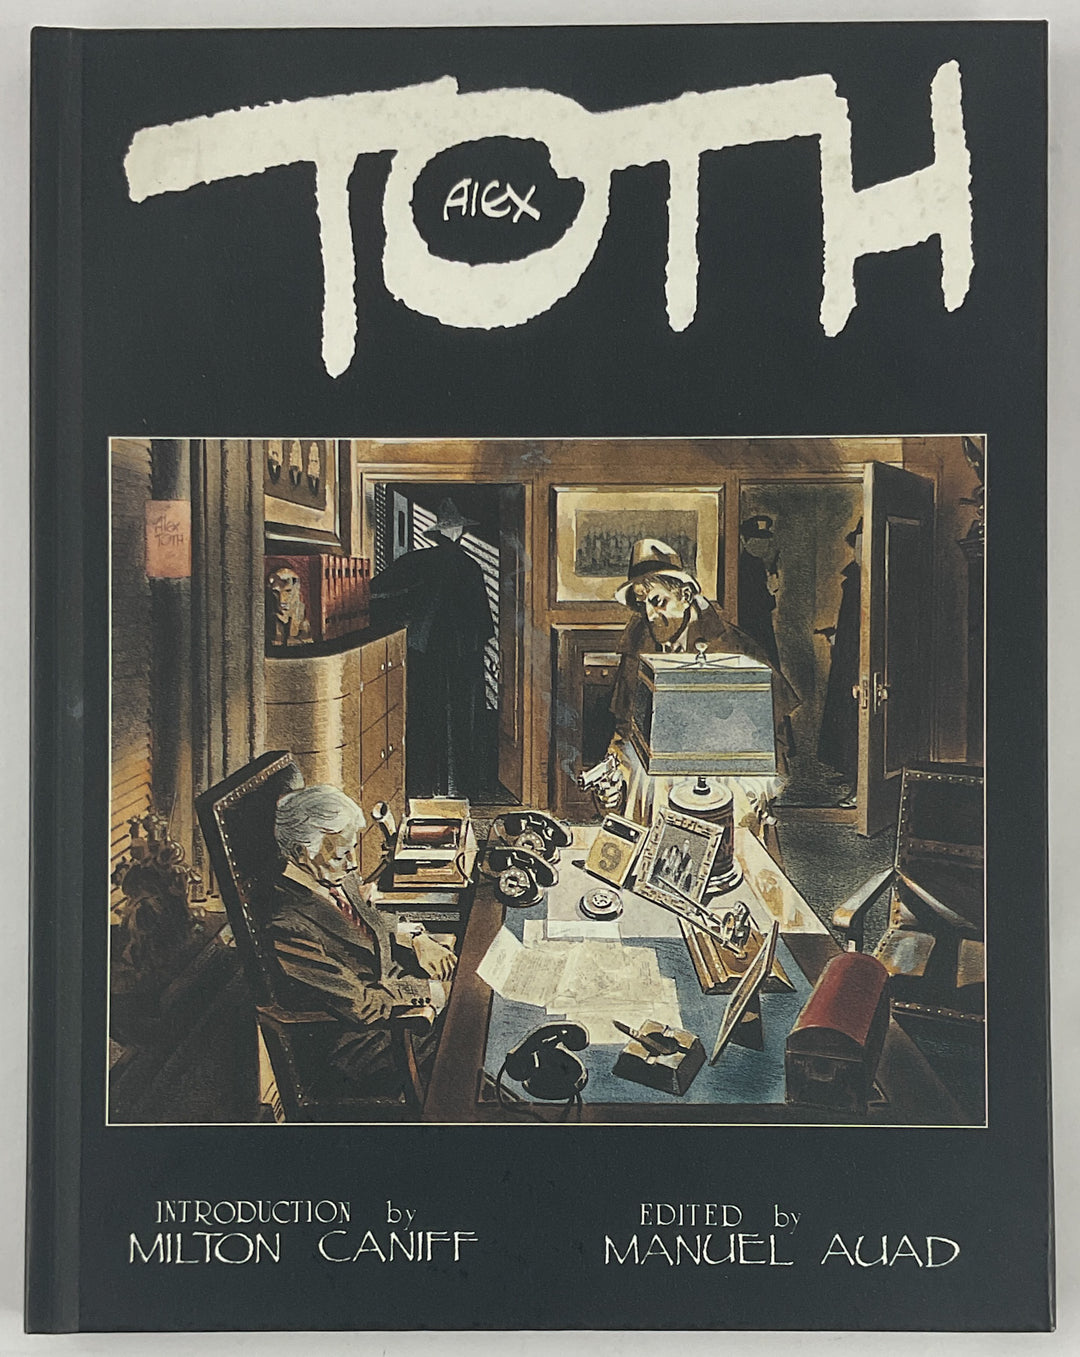 Alex Toth (1995) Signed & Numbered Hardcover